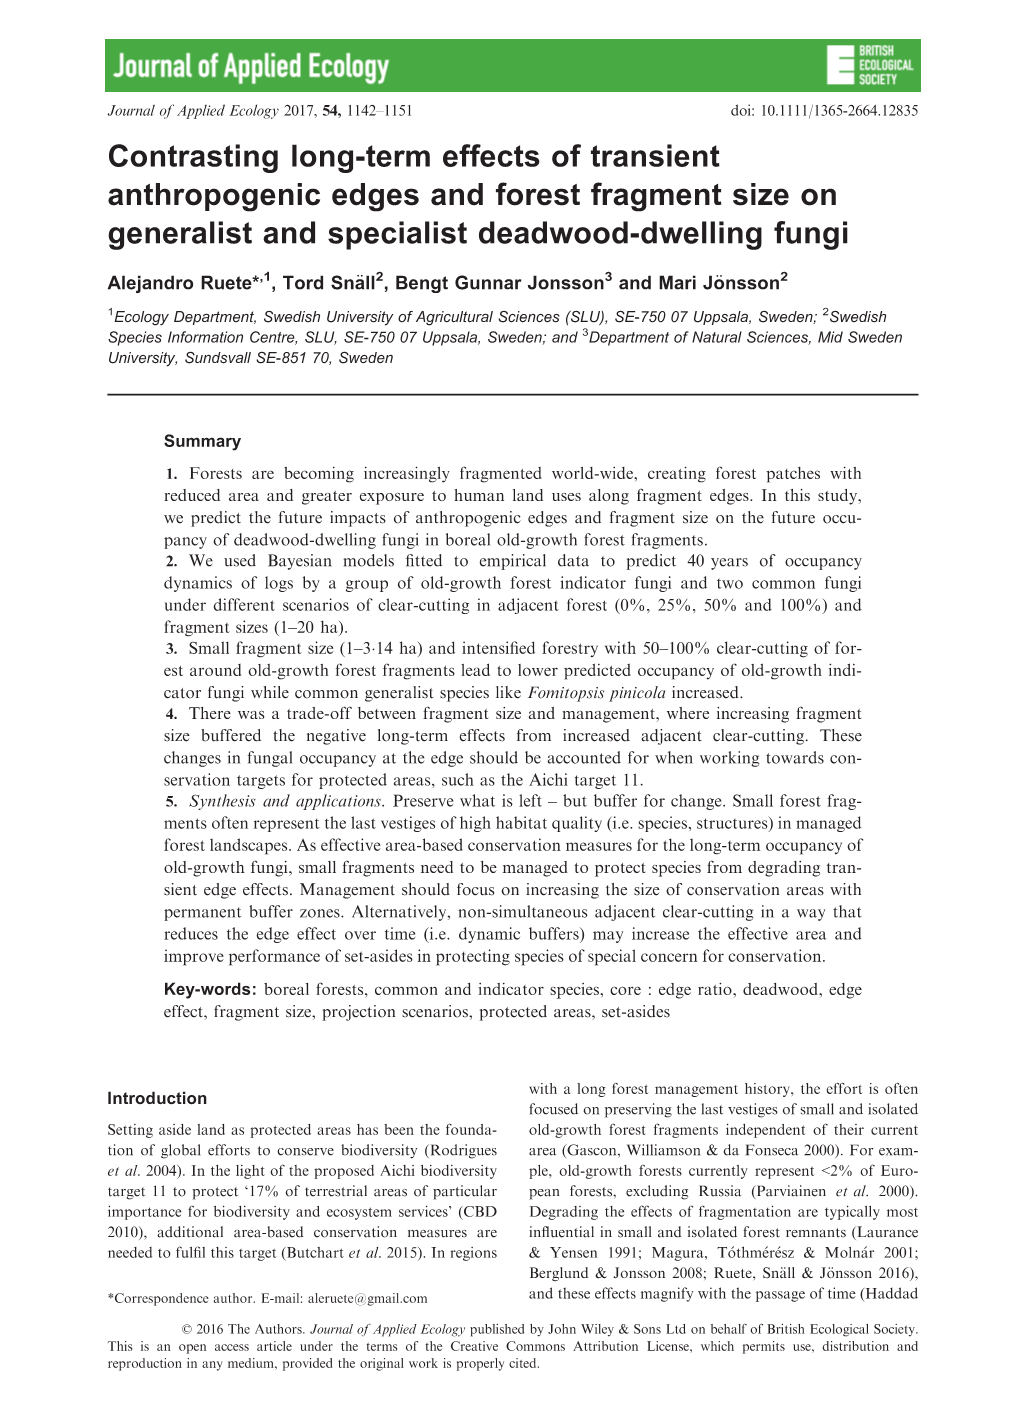 Term Effects of Transient Anthropogenic Edges and Forest Fragment Size on Generalist and Specialist Deadwood-Dwelling Fungi